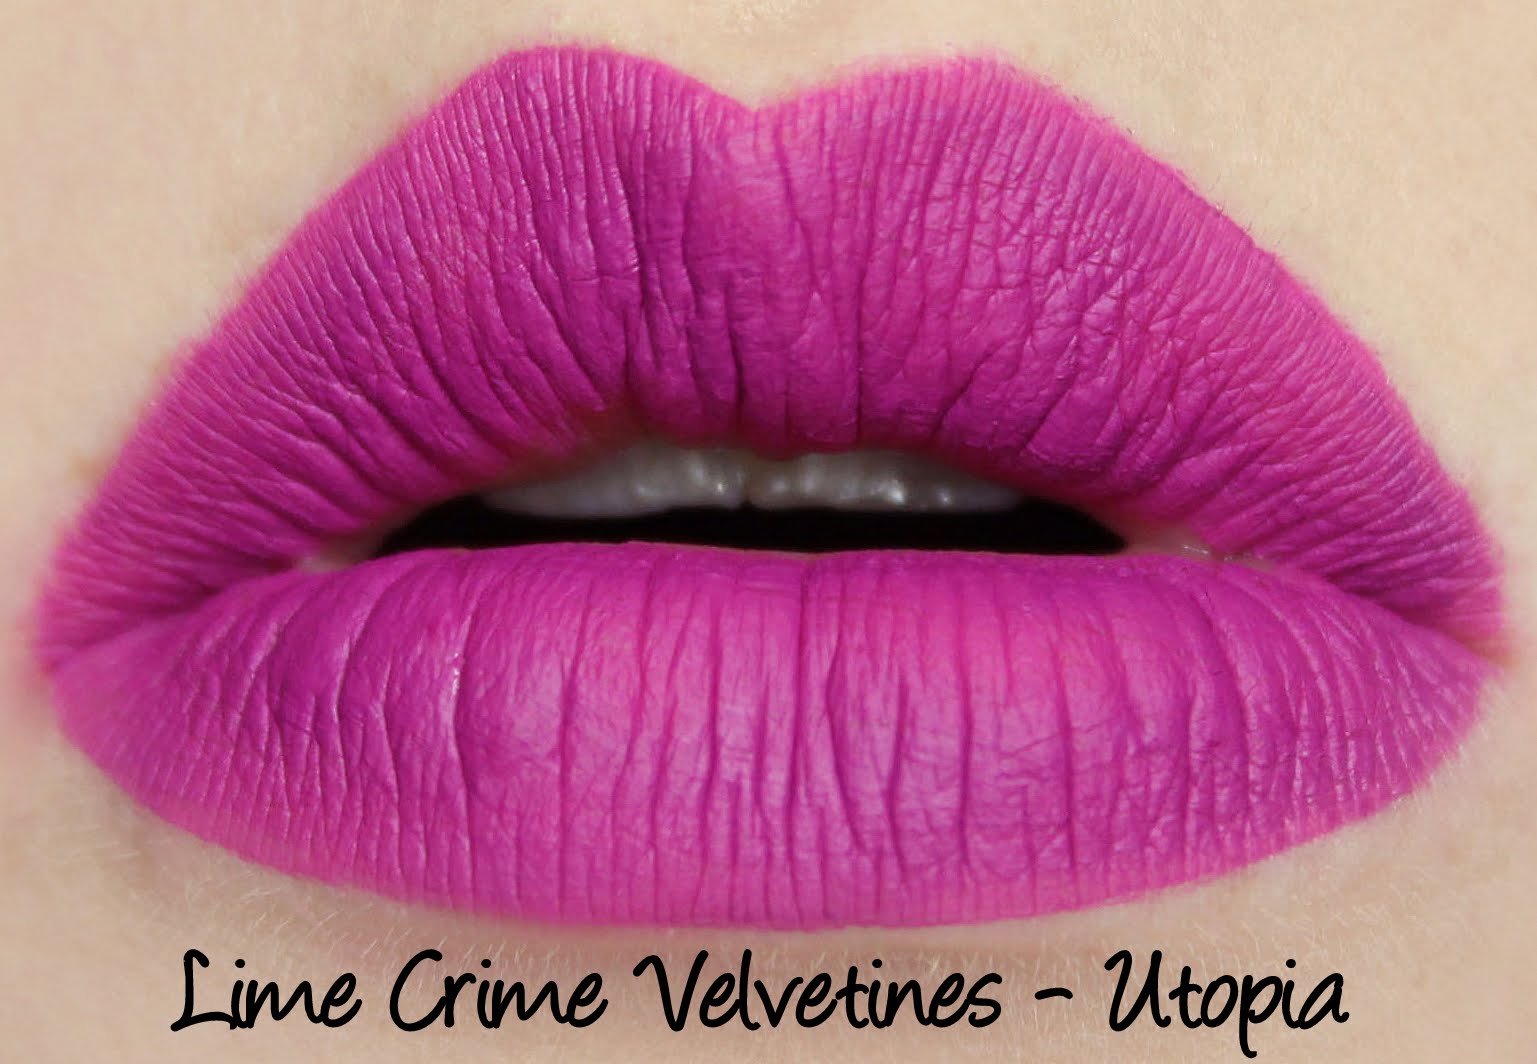 Lime Crime Velvetine - Utopia Swatches & Review